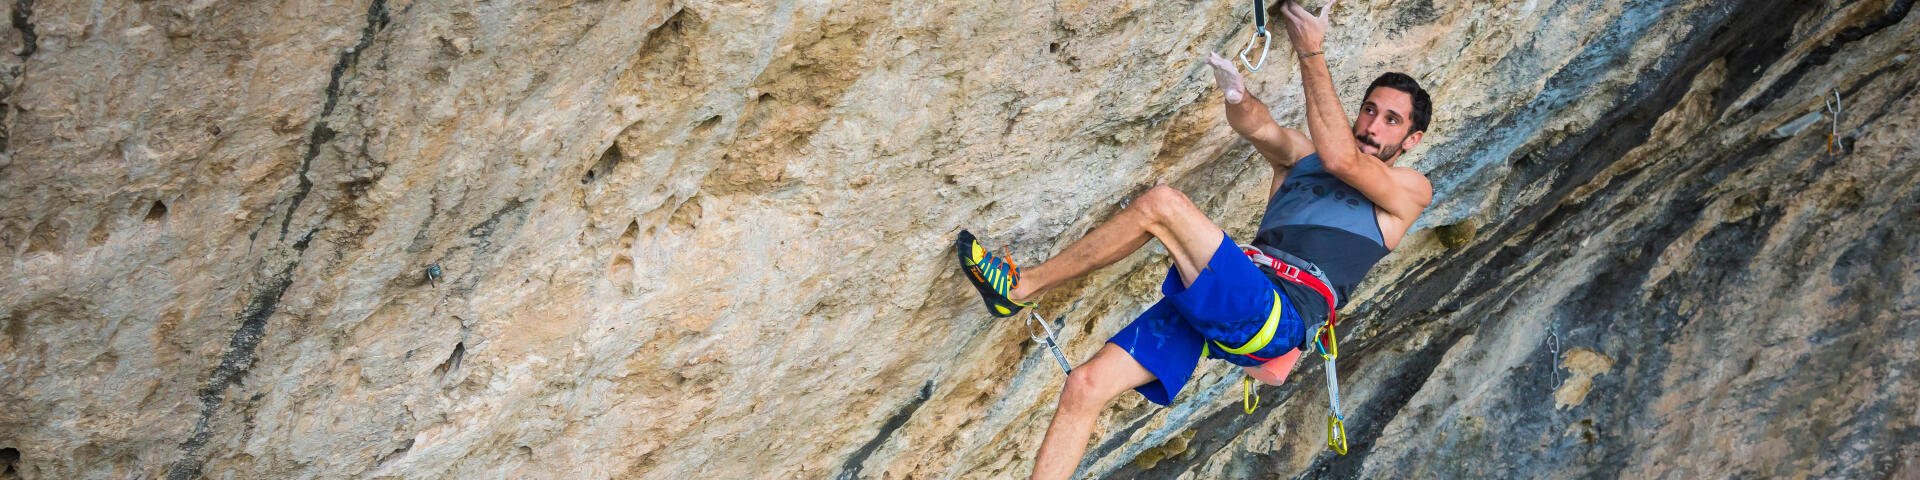 How to Choose Your Climbing Harness